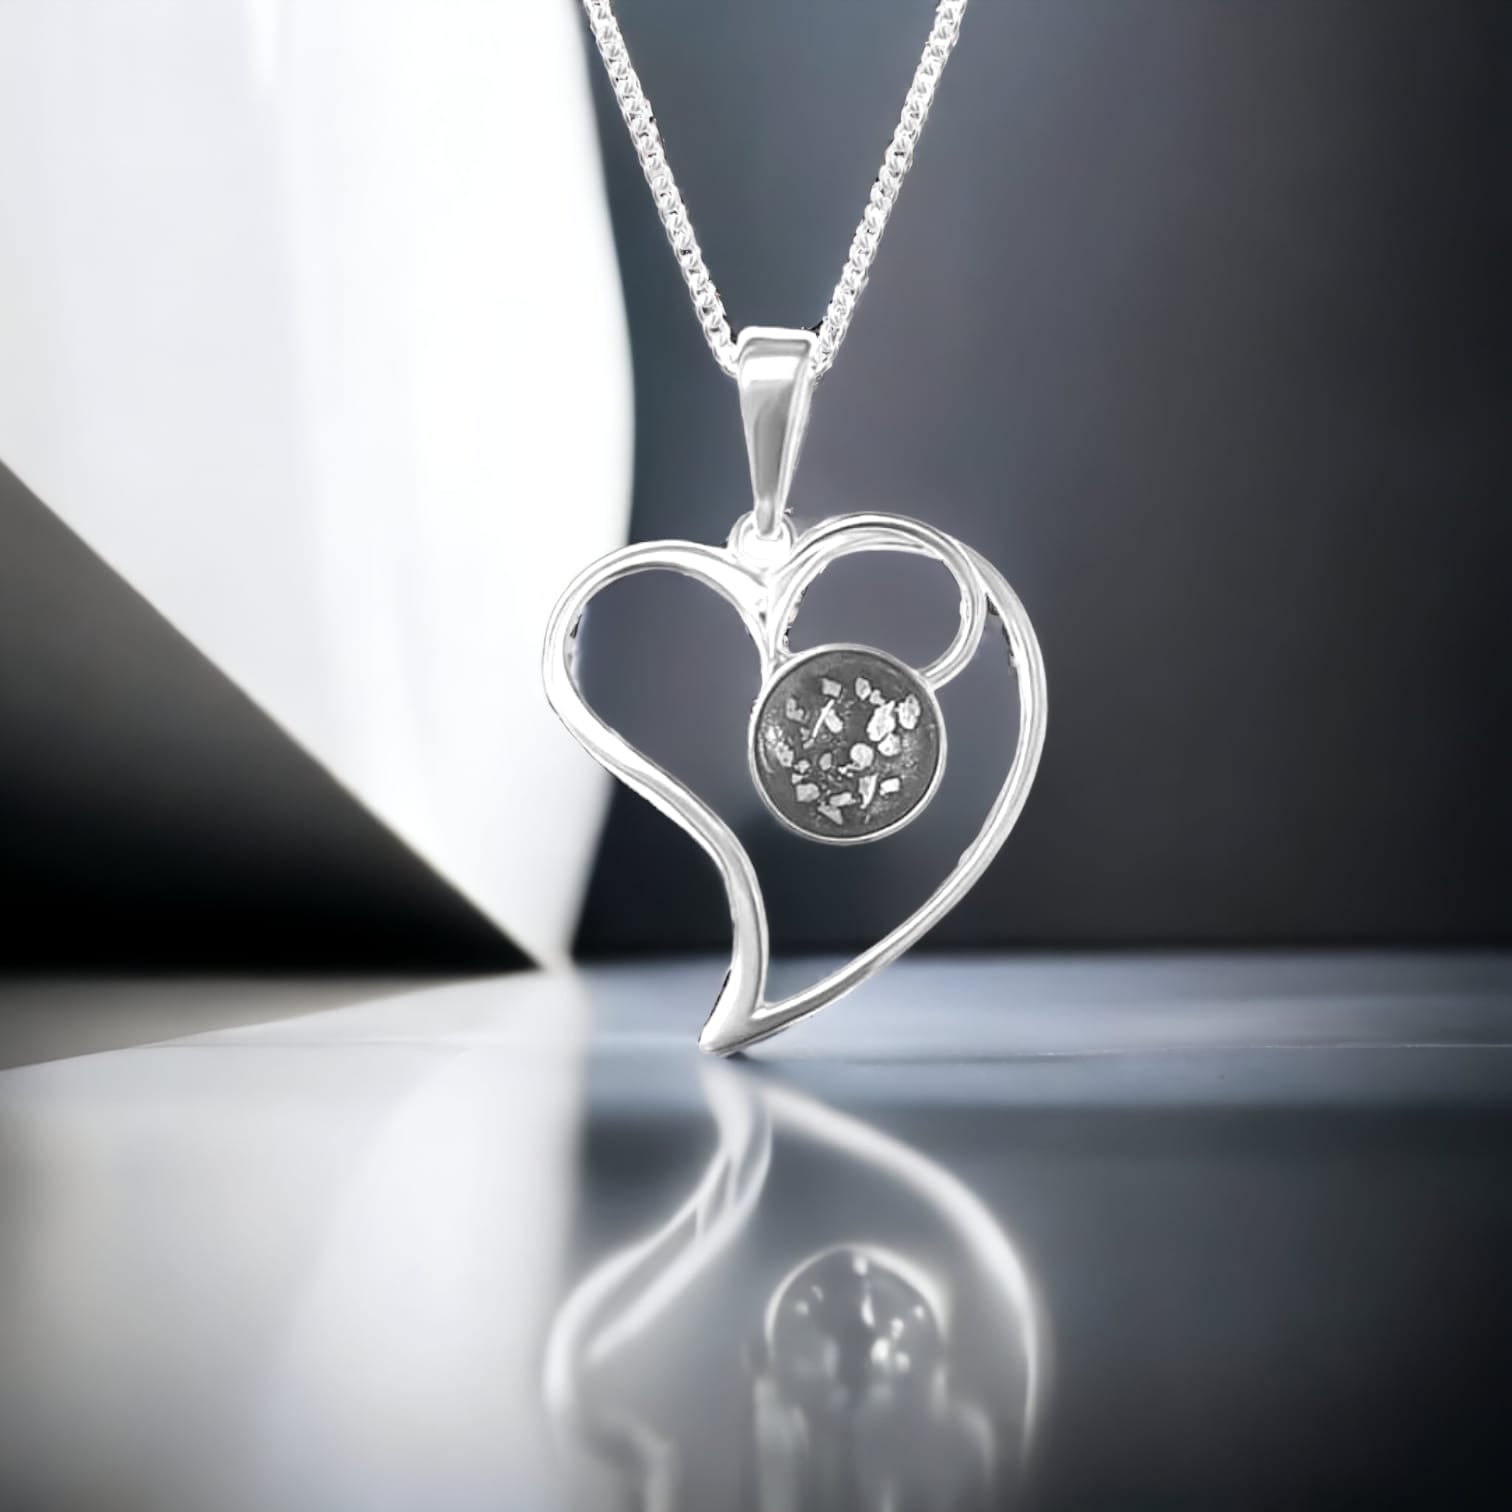 SK - Large memorial pendant - The heart of you. 4 weeks